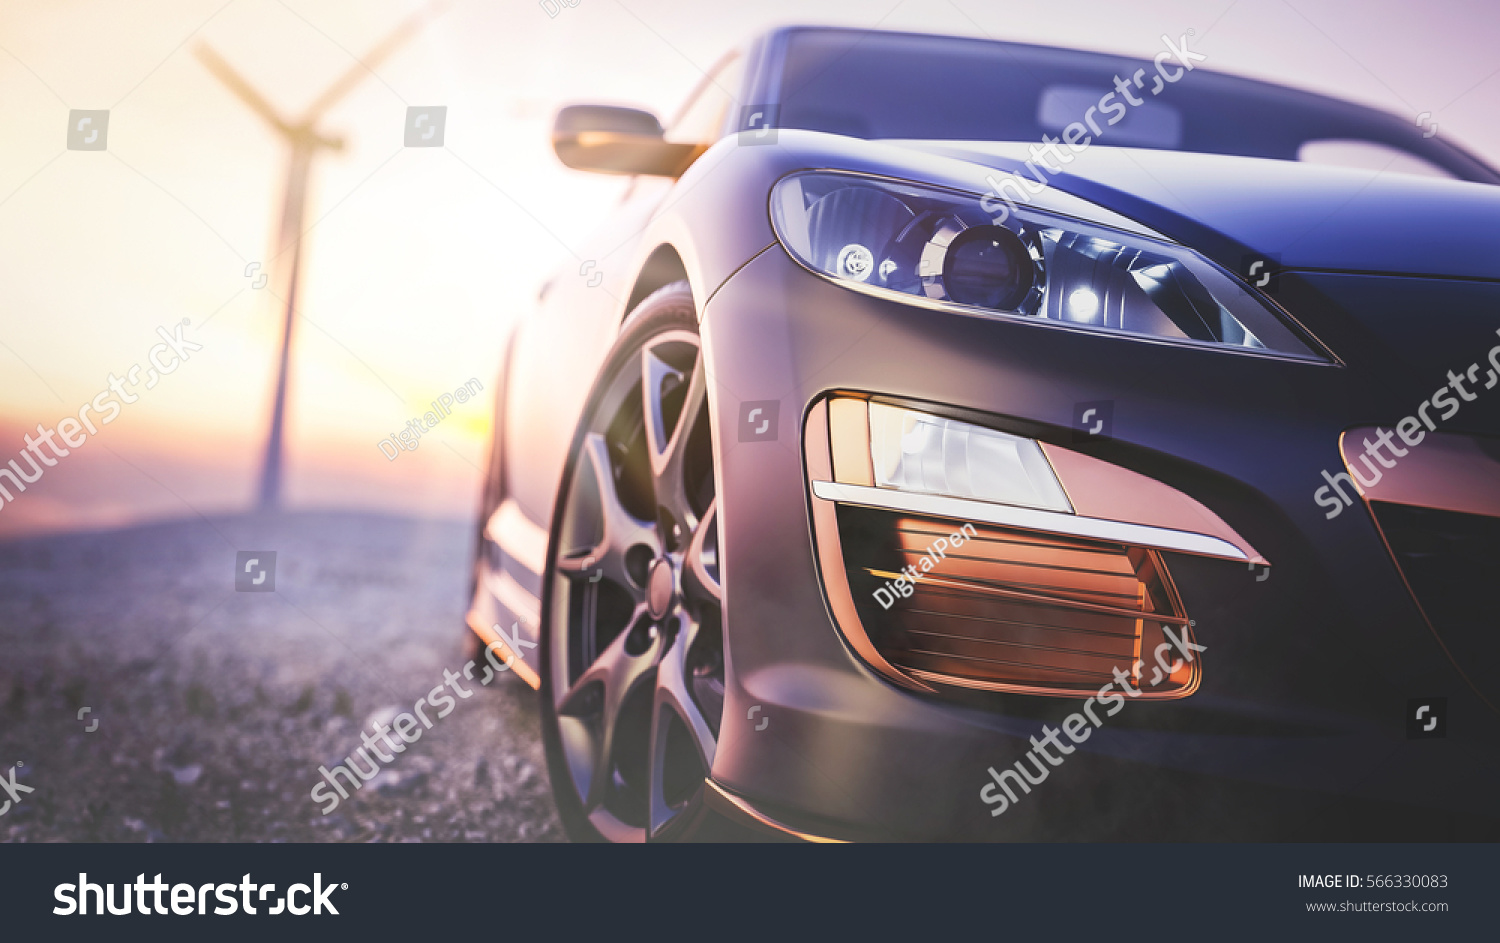 The image in front of the sports car scene behind as the sun going down with wind turbines in the back. #566330083